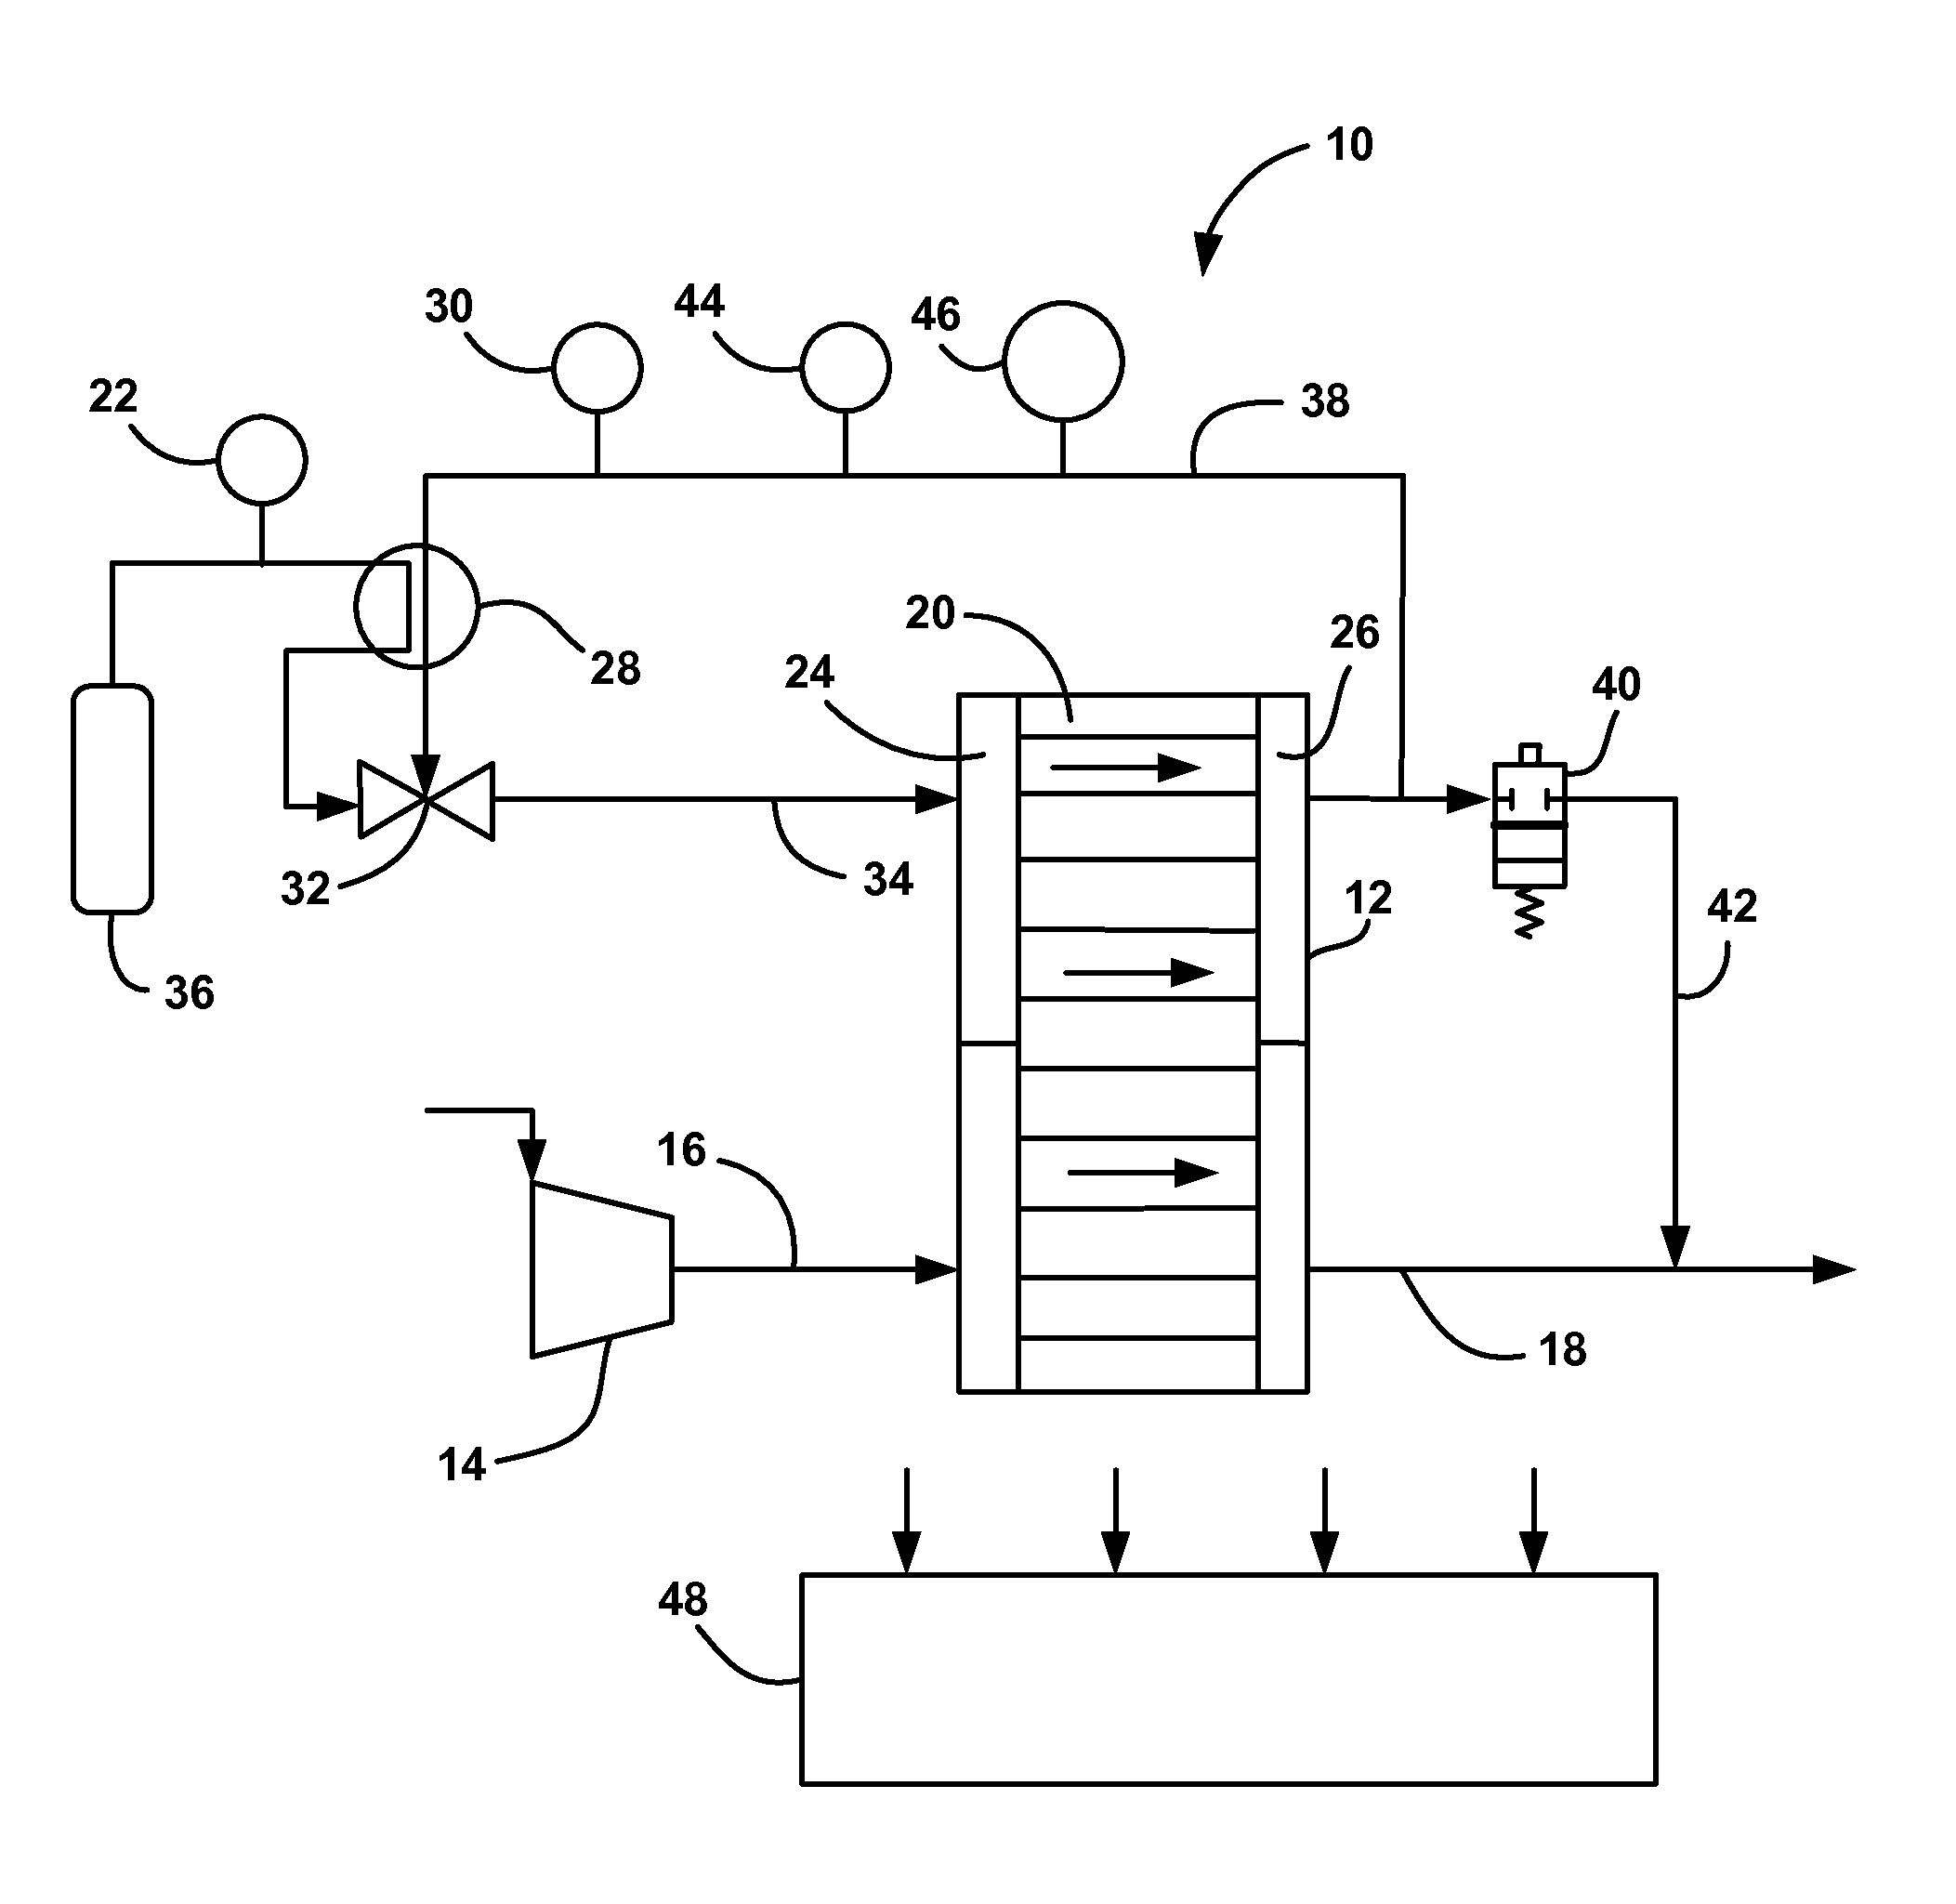 Hydrogen concentration sensor utilizing cell voltage resulting from hydrogen partial pressure difference